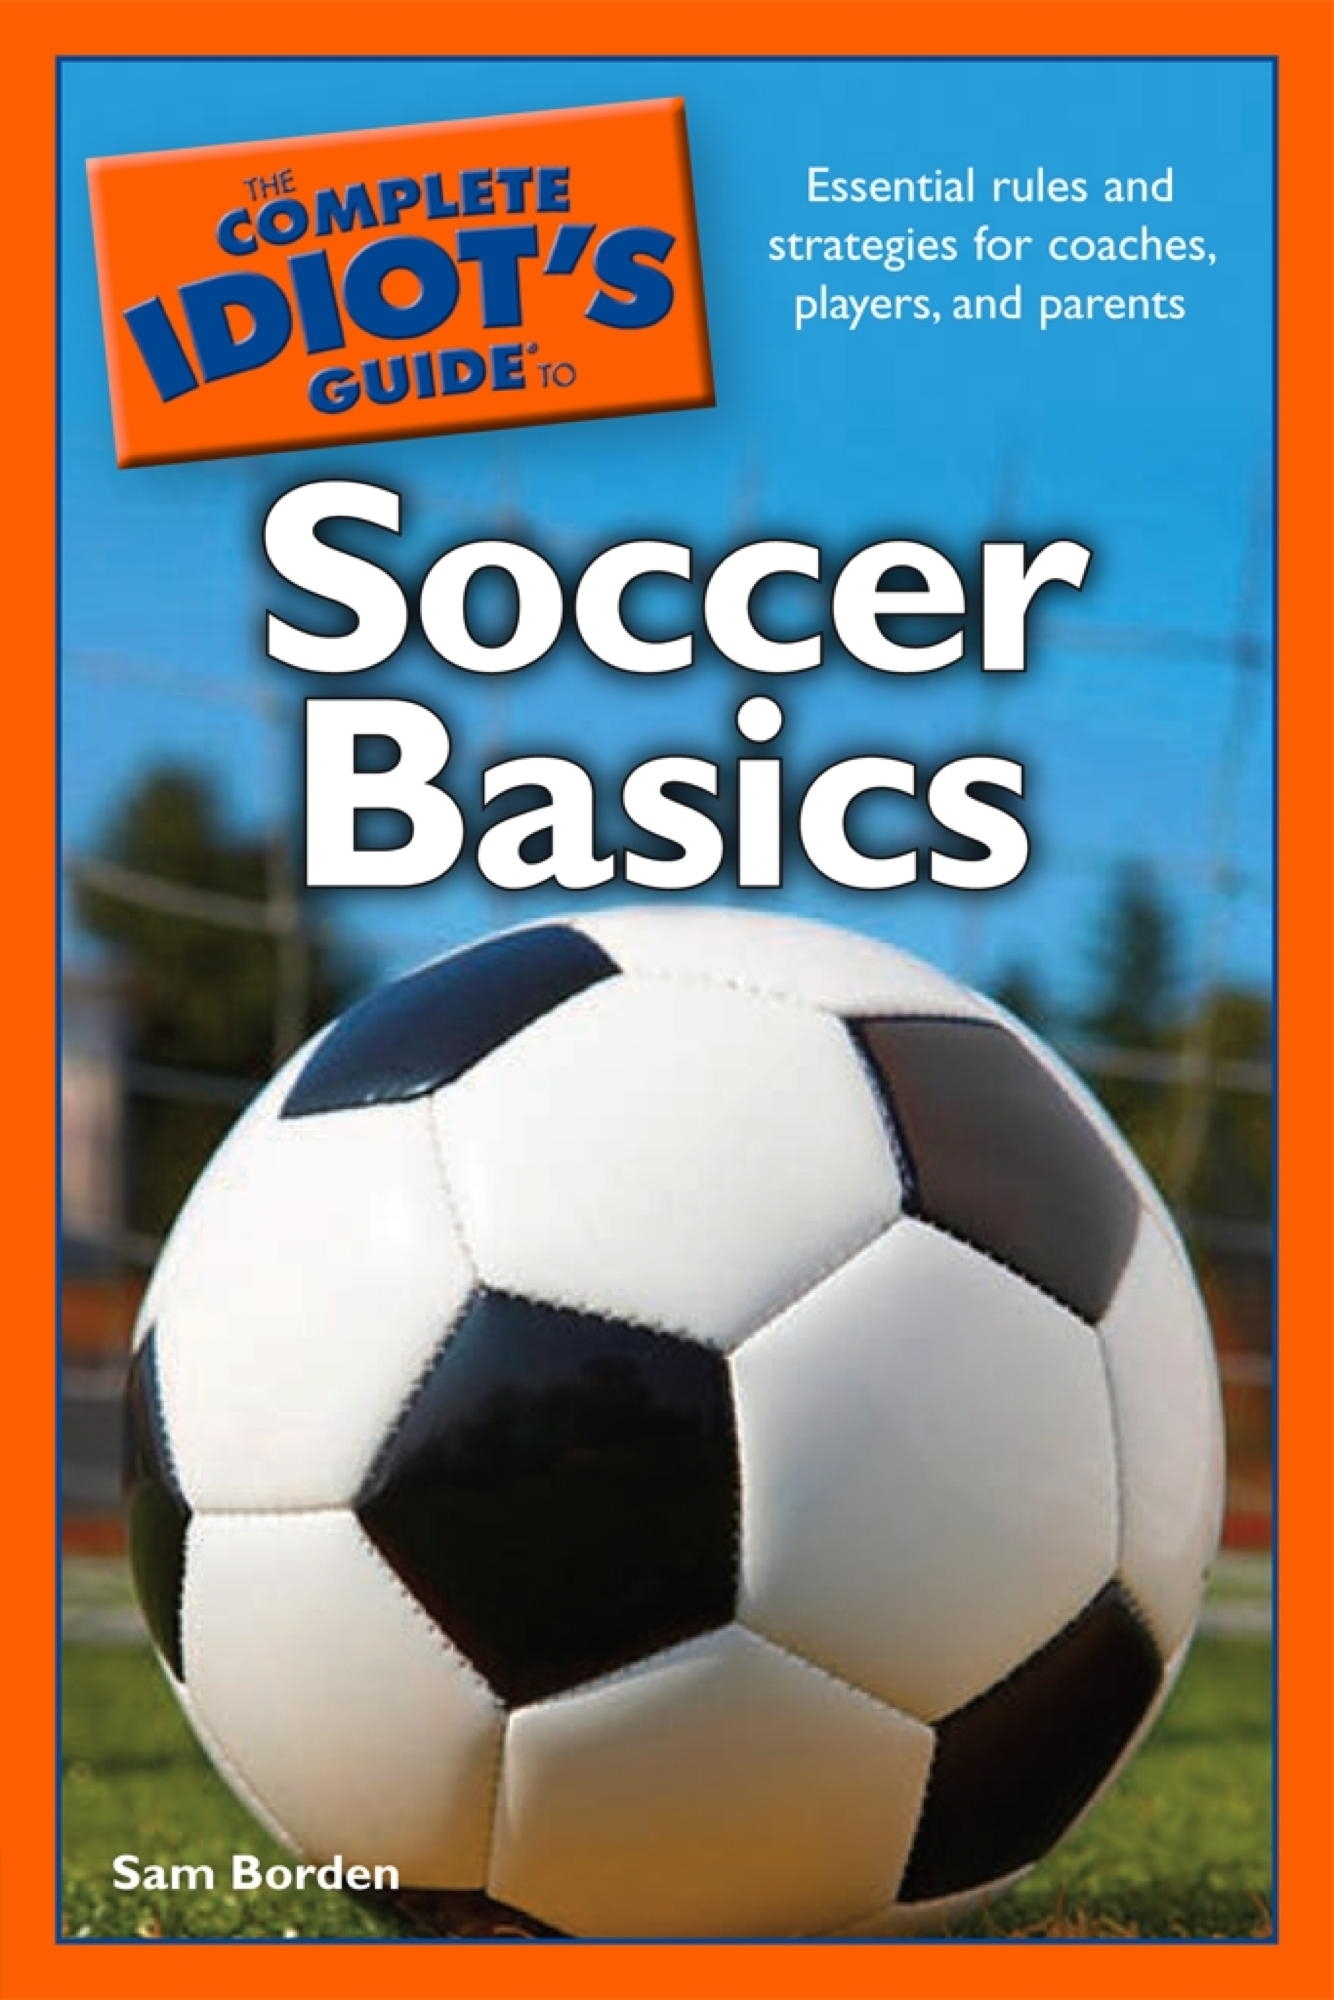 The Complete Idiot's Guide to Soccer Basics